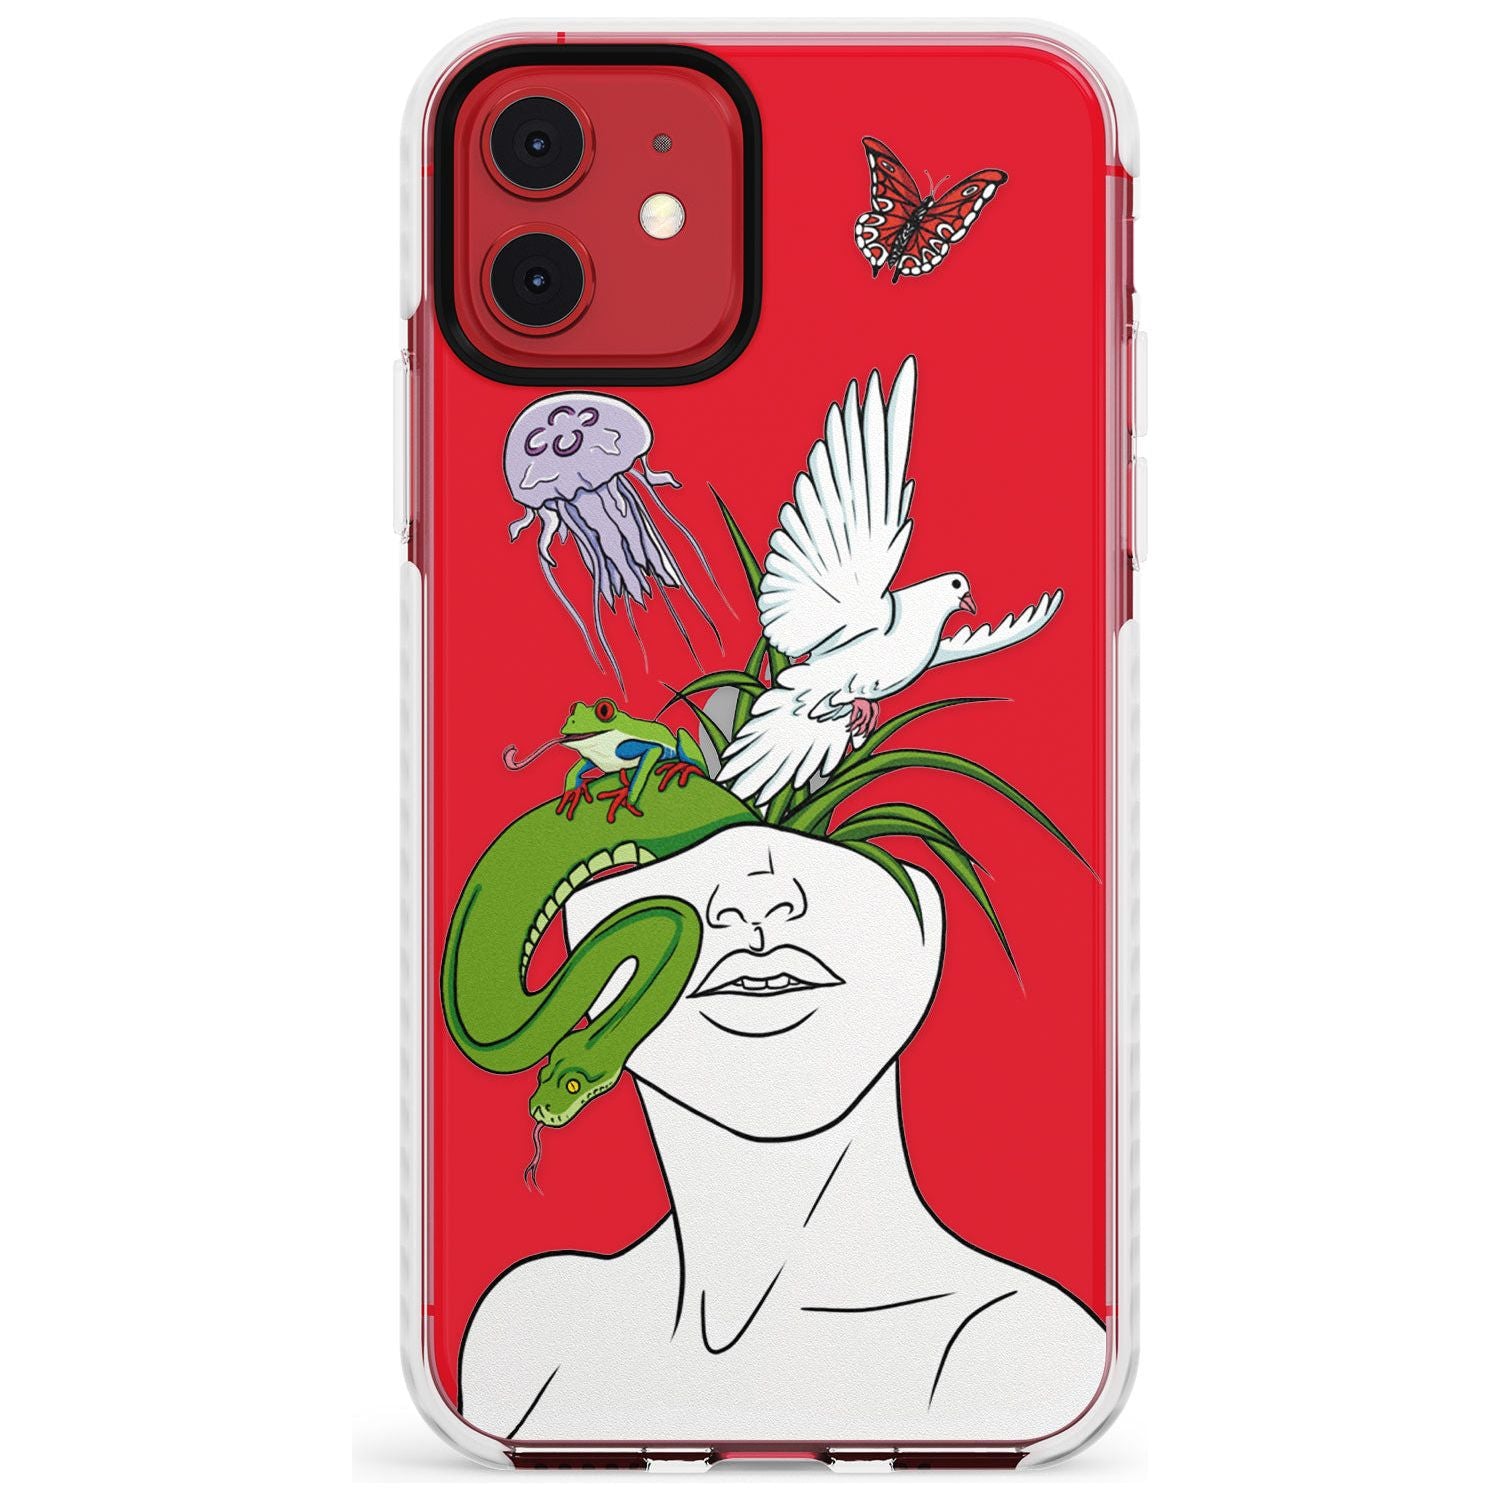 WILD THOUGHTS Slim TPU Phone Case for iPhone 11